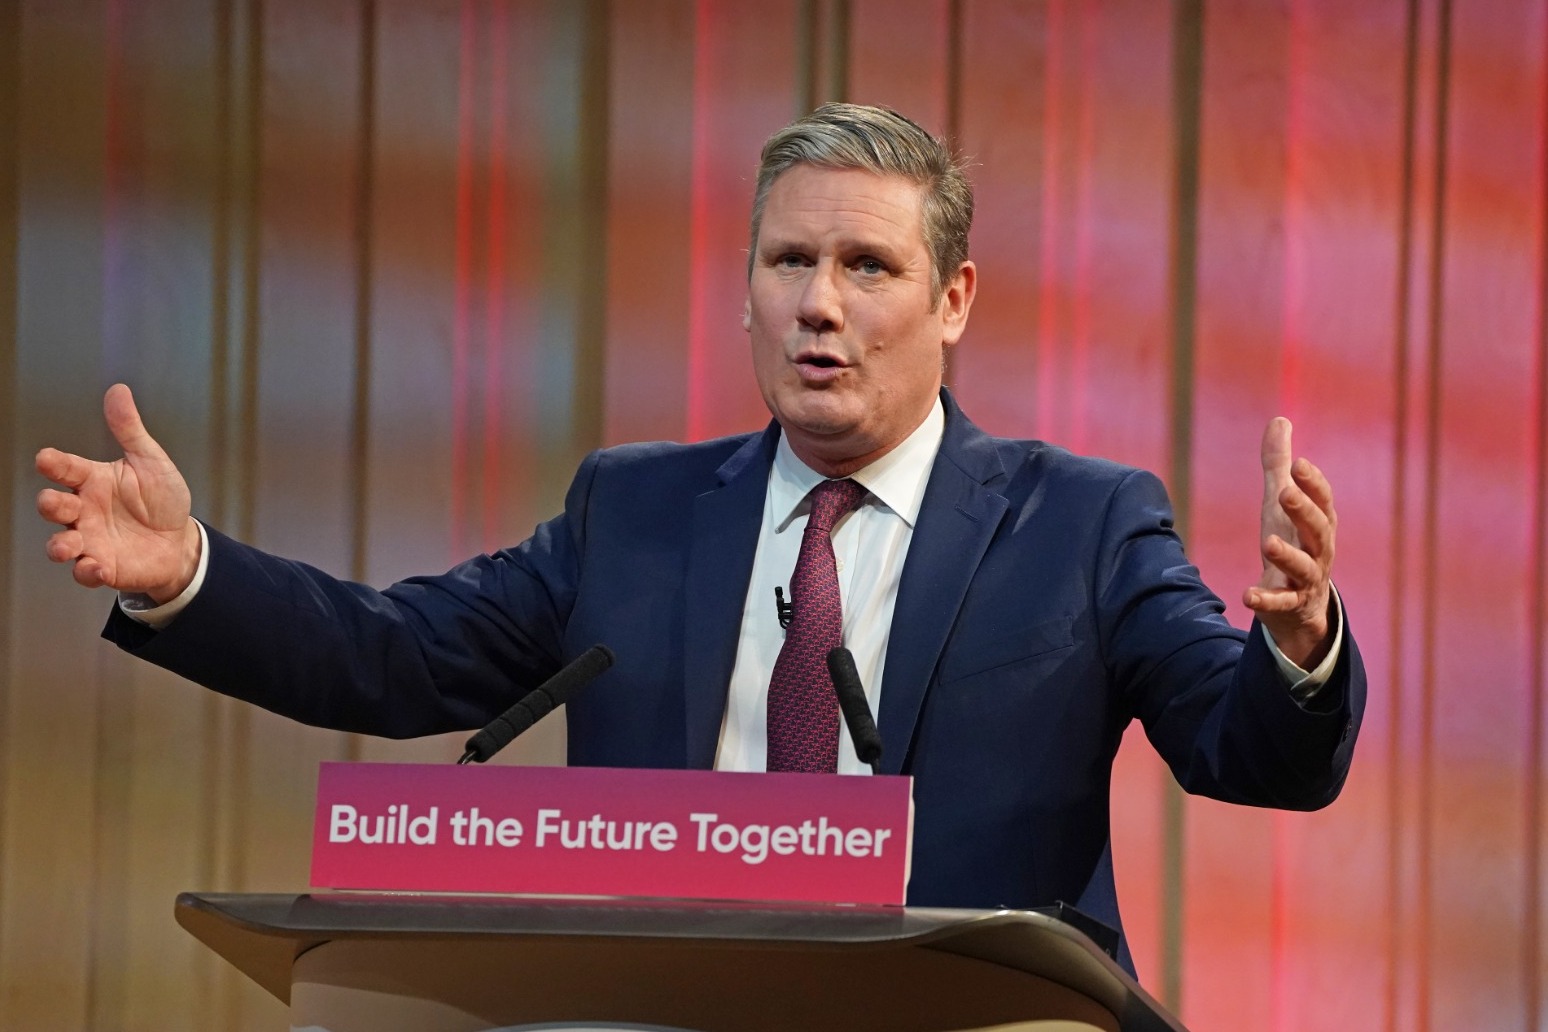 Starmer urges party not to ‘run away from mainstream’ as he looks to centre 